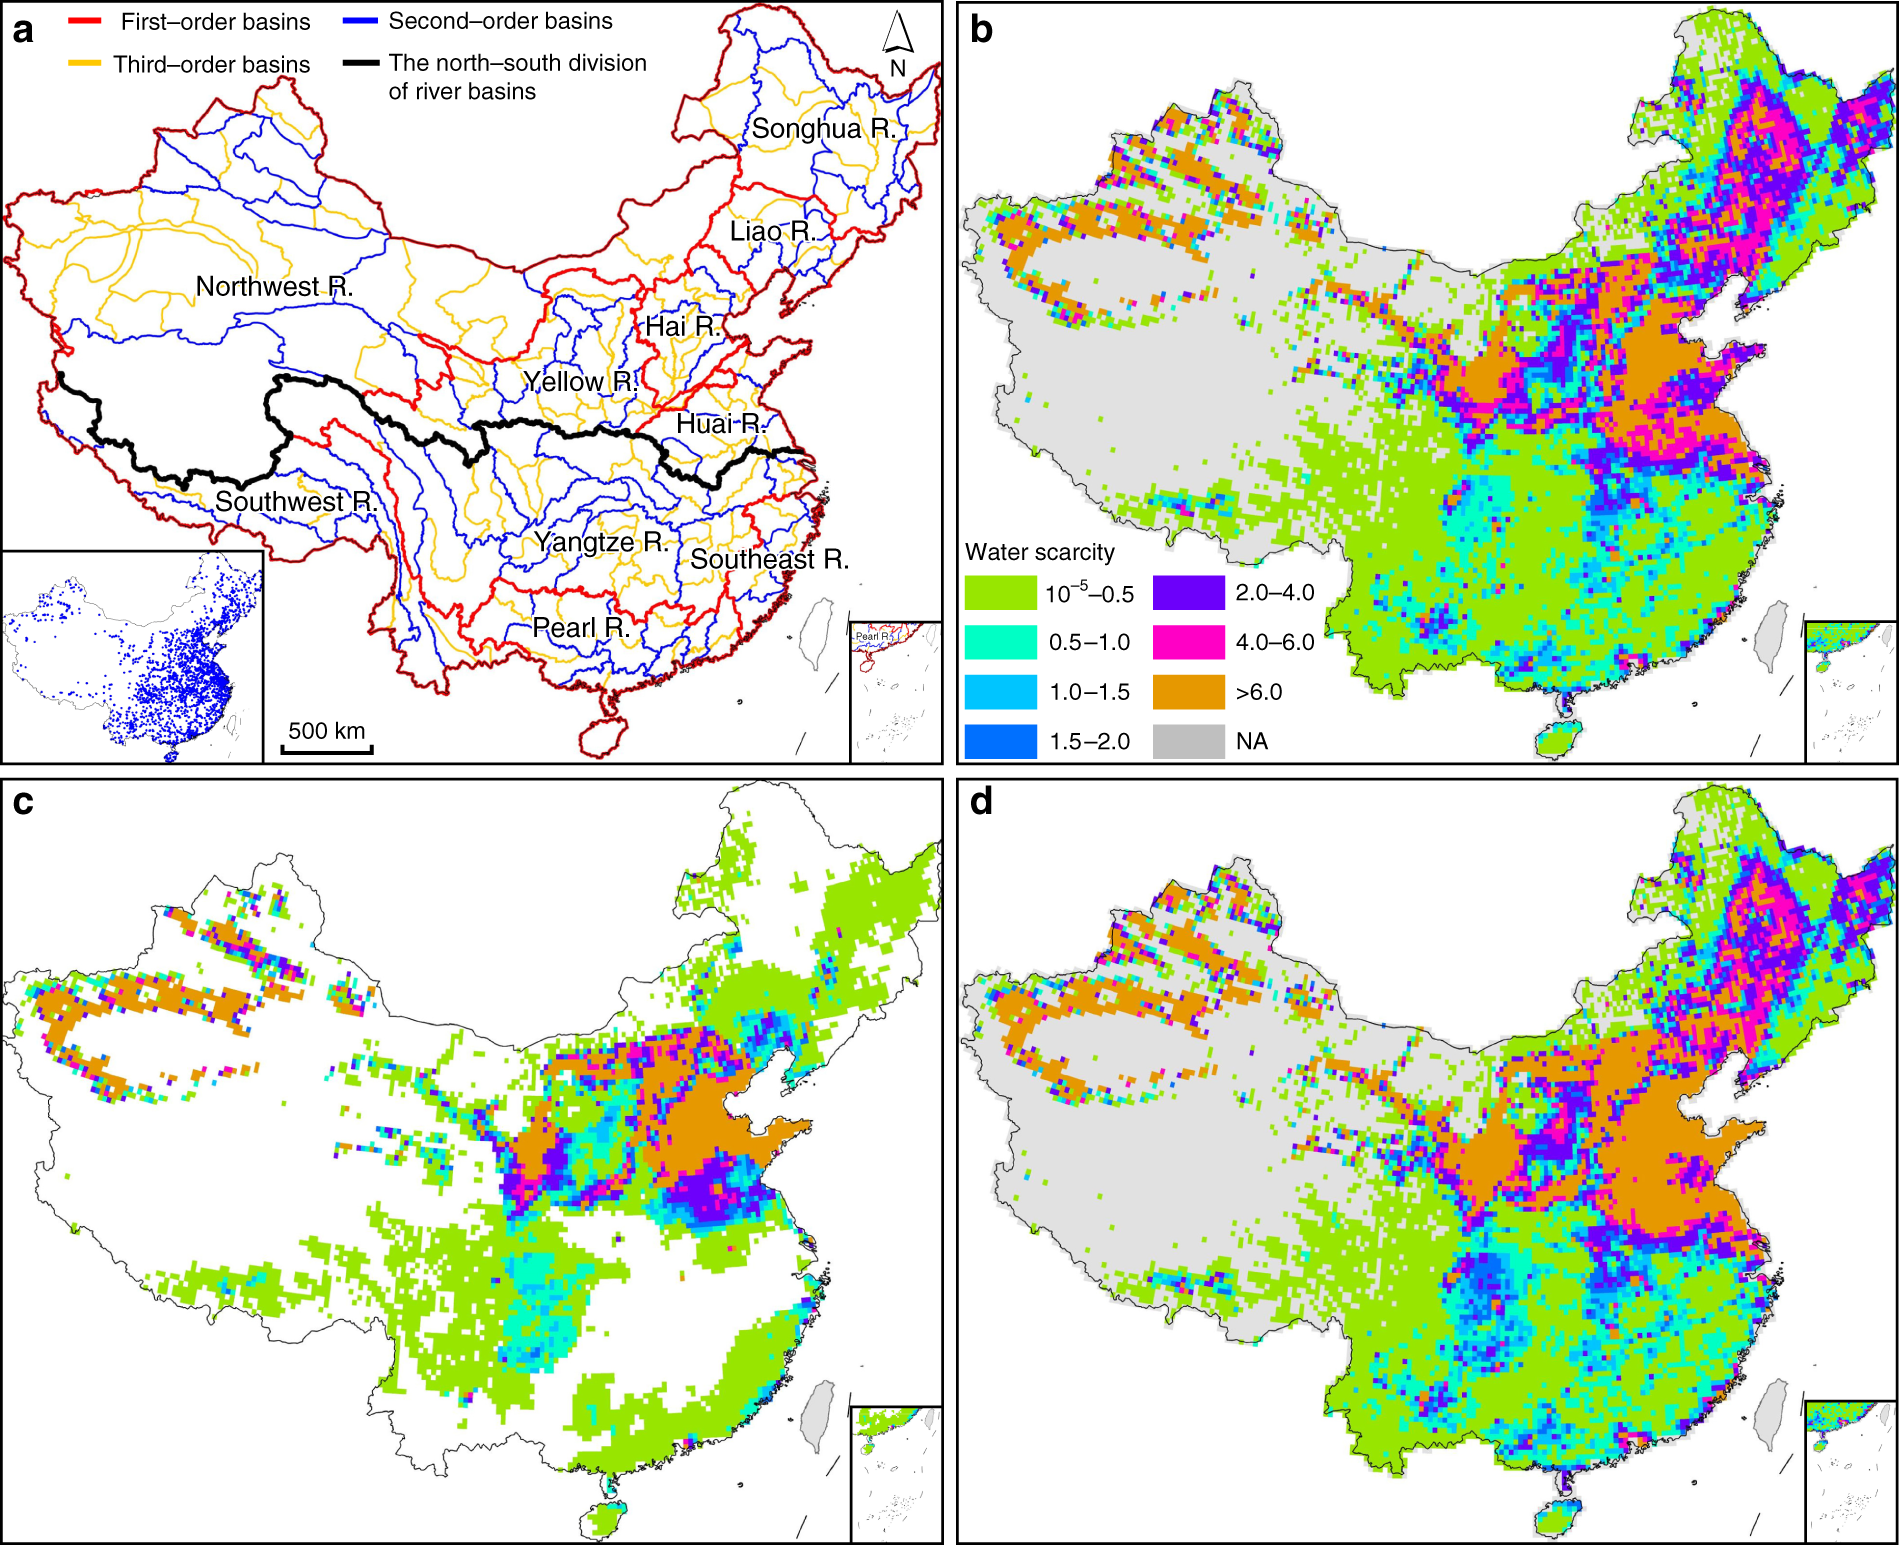 Pollution exacerbates China's water scarcity and its regional inequality |  Nature Communications